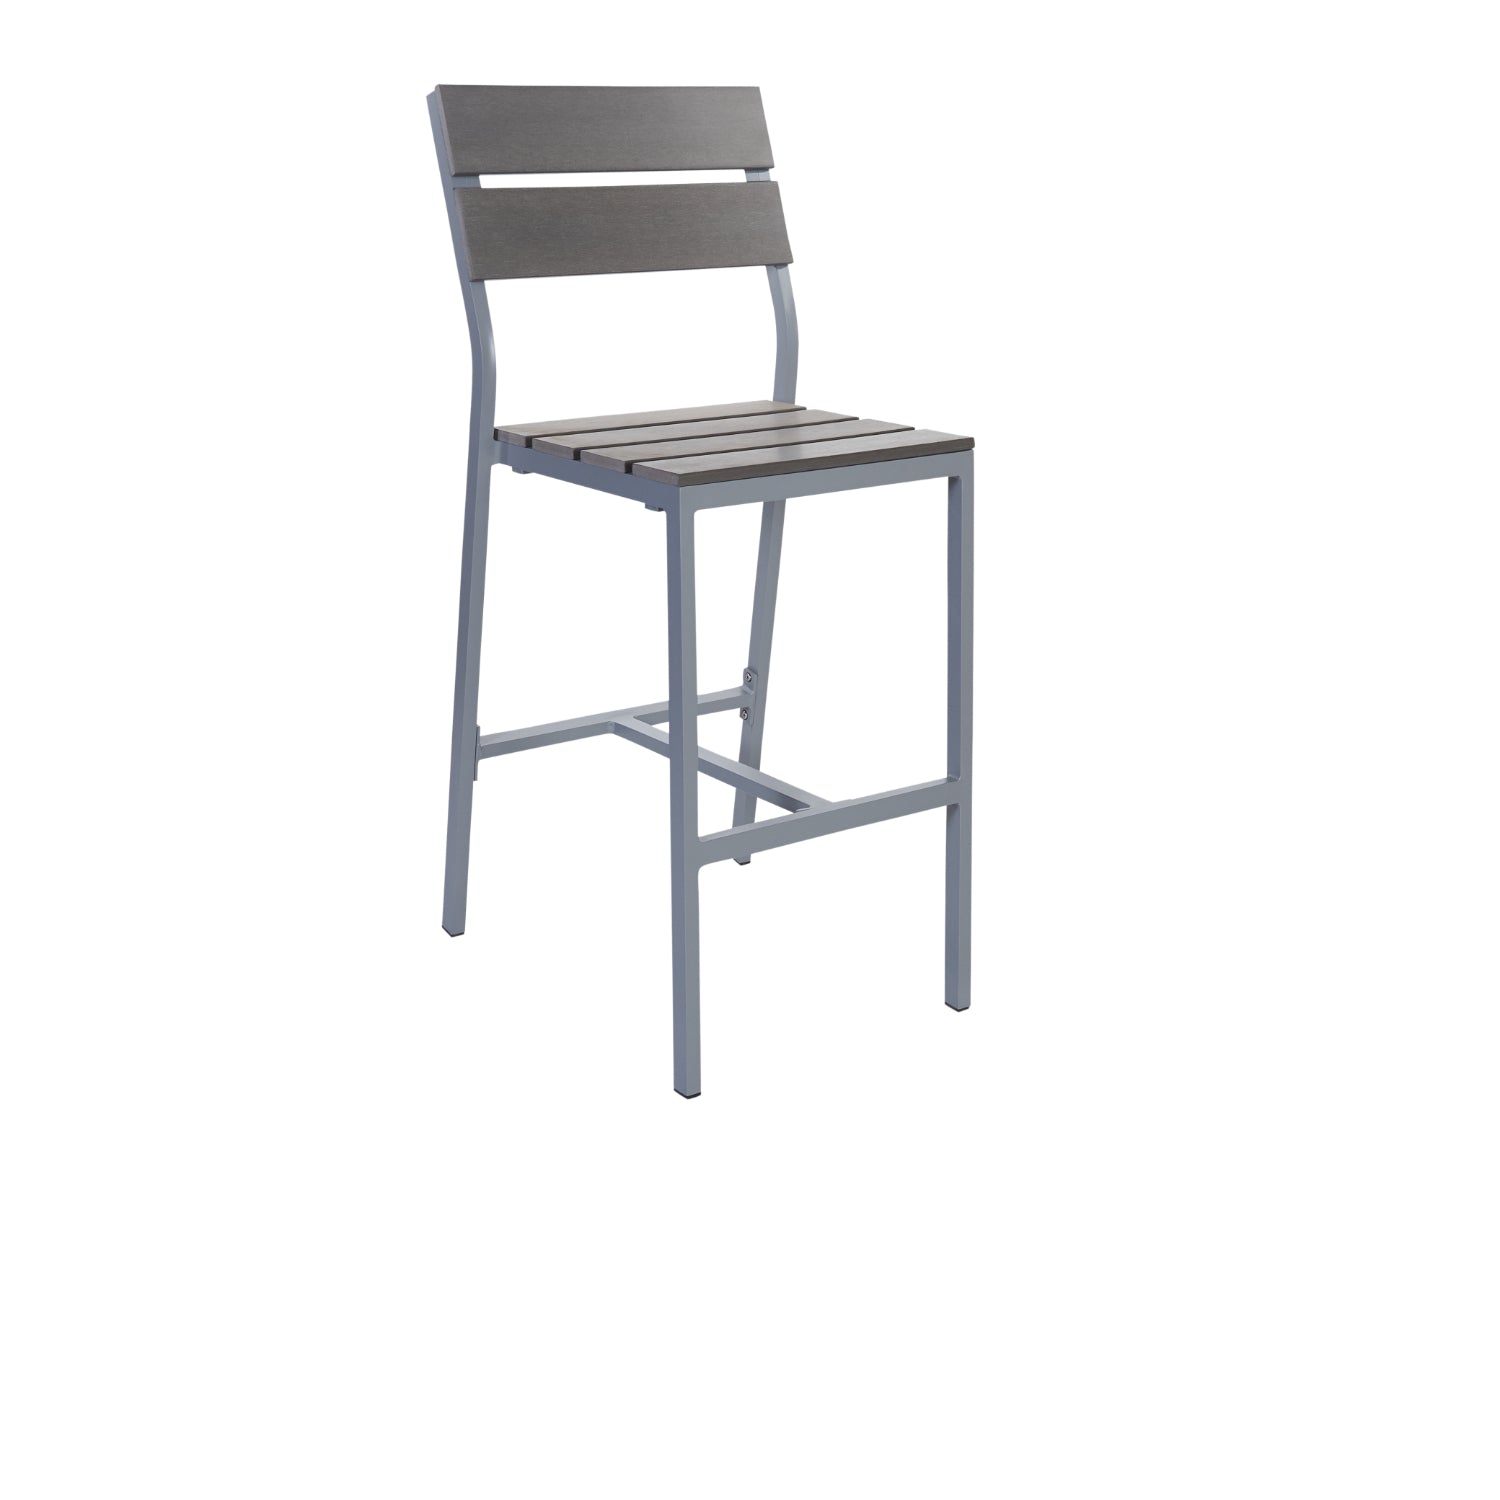 Seaside Collection Outdoor/Indoor Aluminum Side Barstool with Gray Synthetic Teak Seat and Back